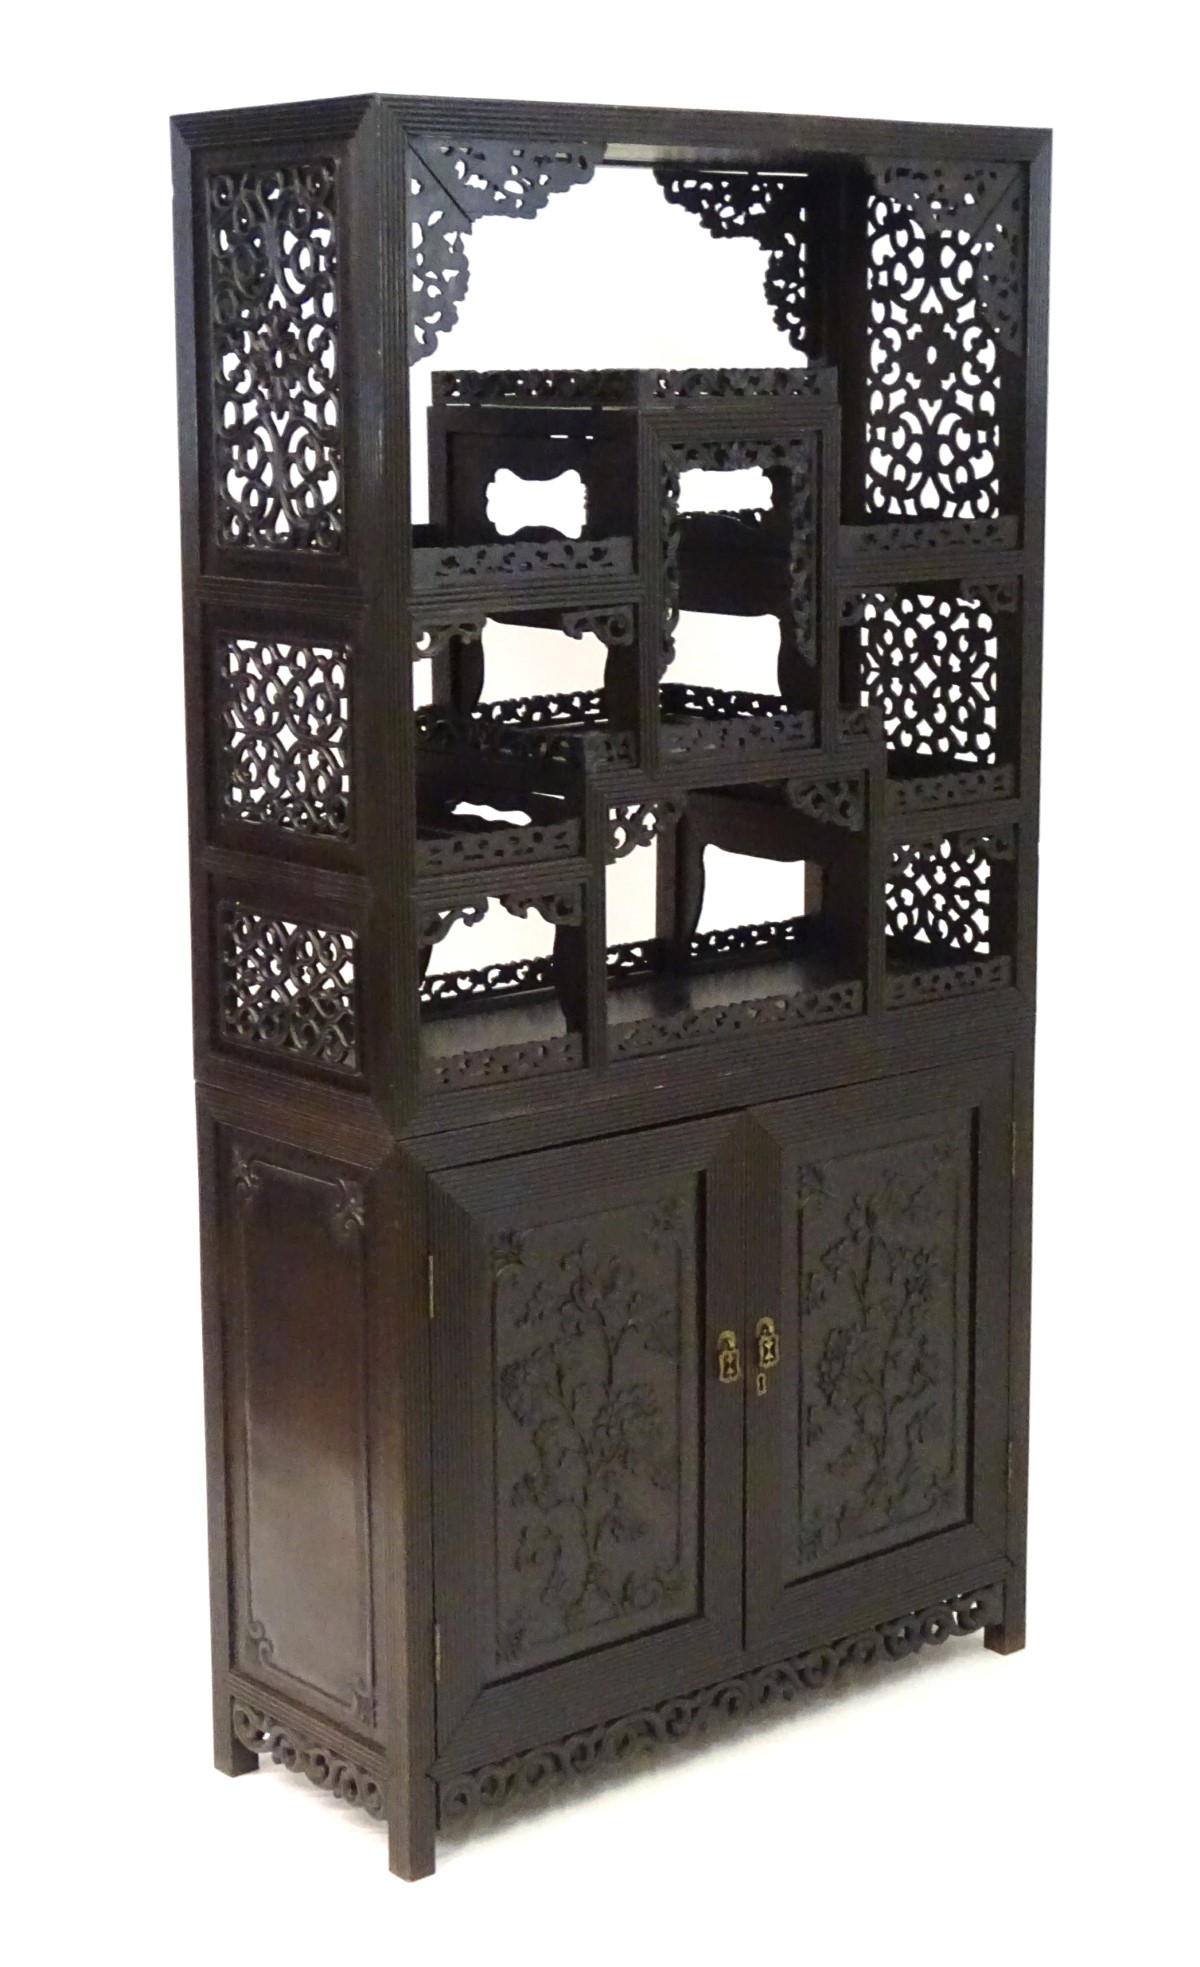 A late 19thC / early 20thC Chinese hardwood cabinet with open display shelves resting on a cupboard - Image 4 of 10